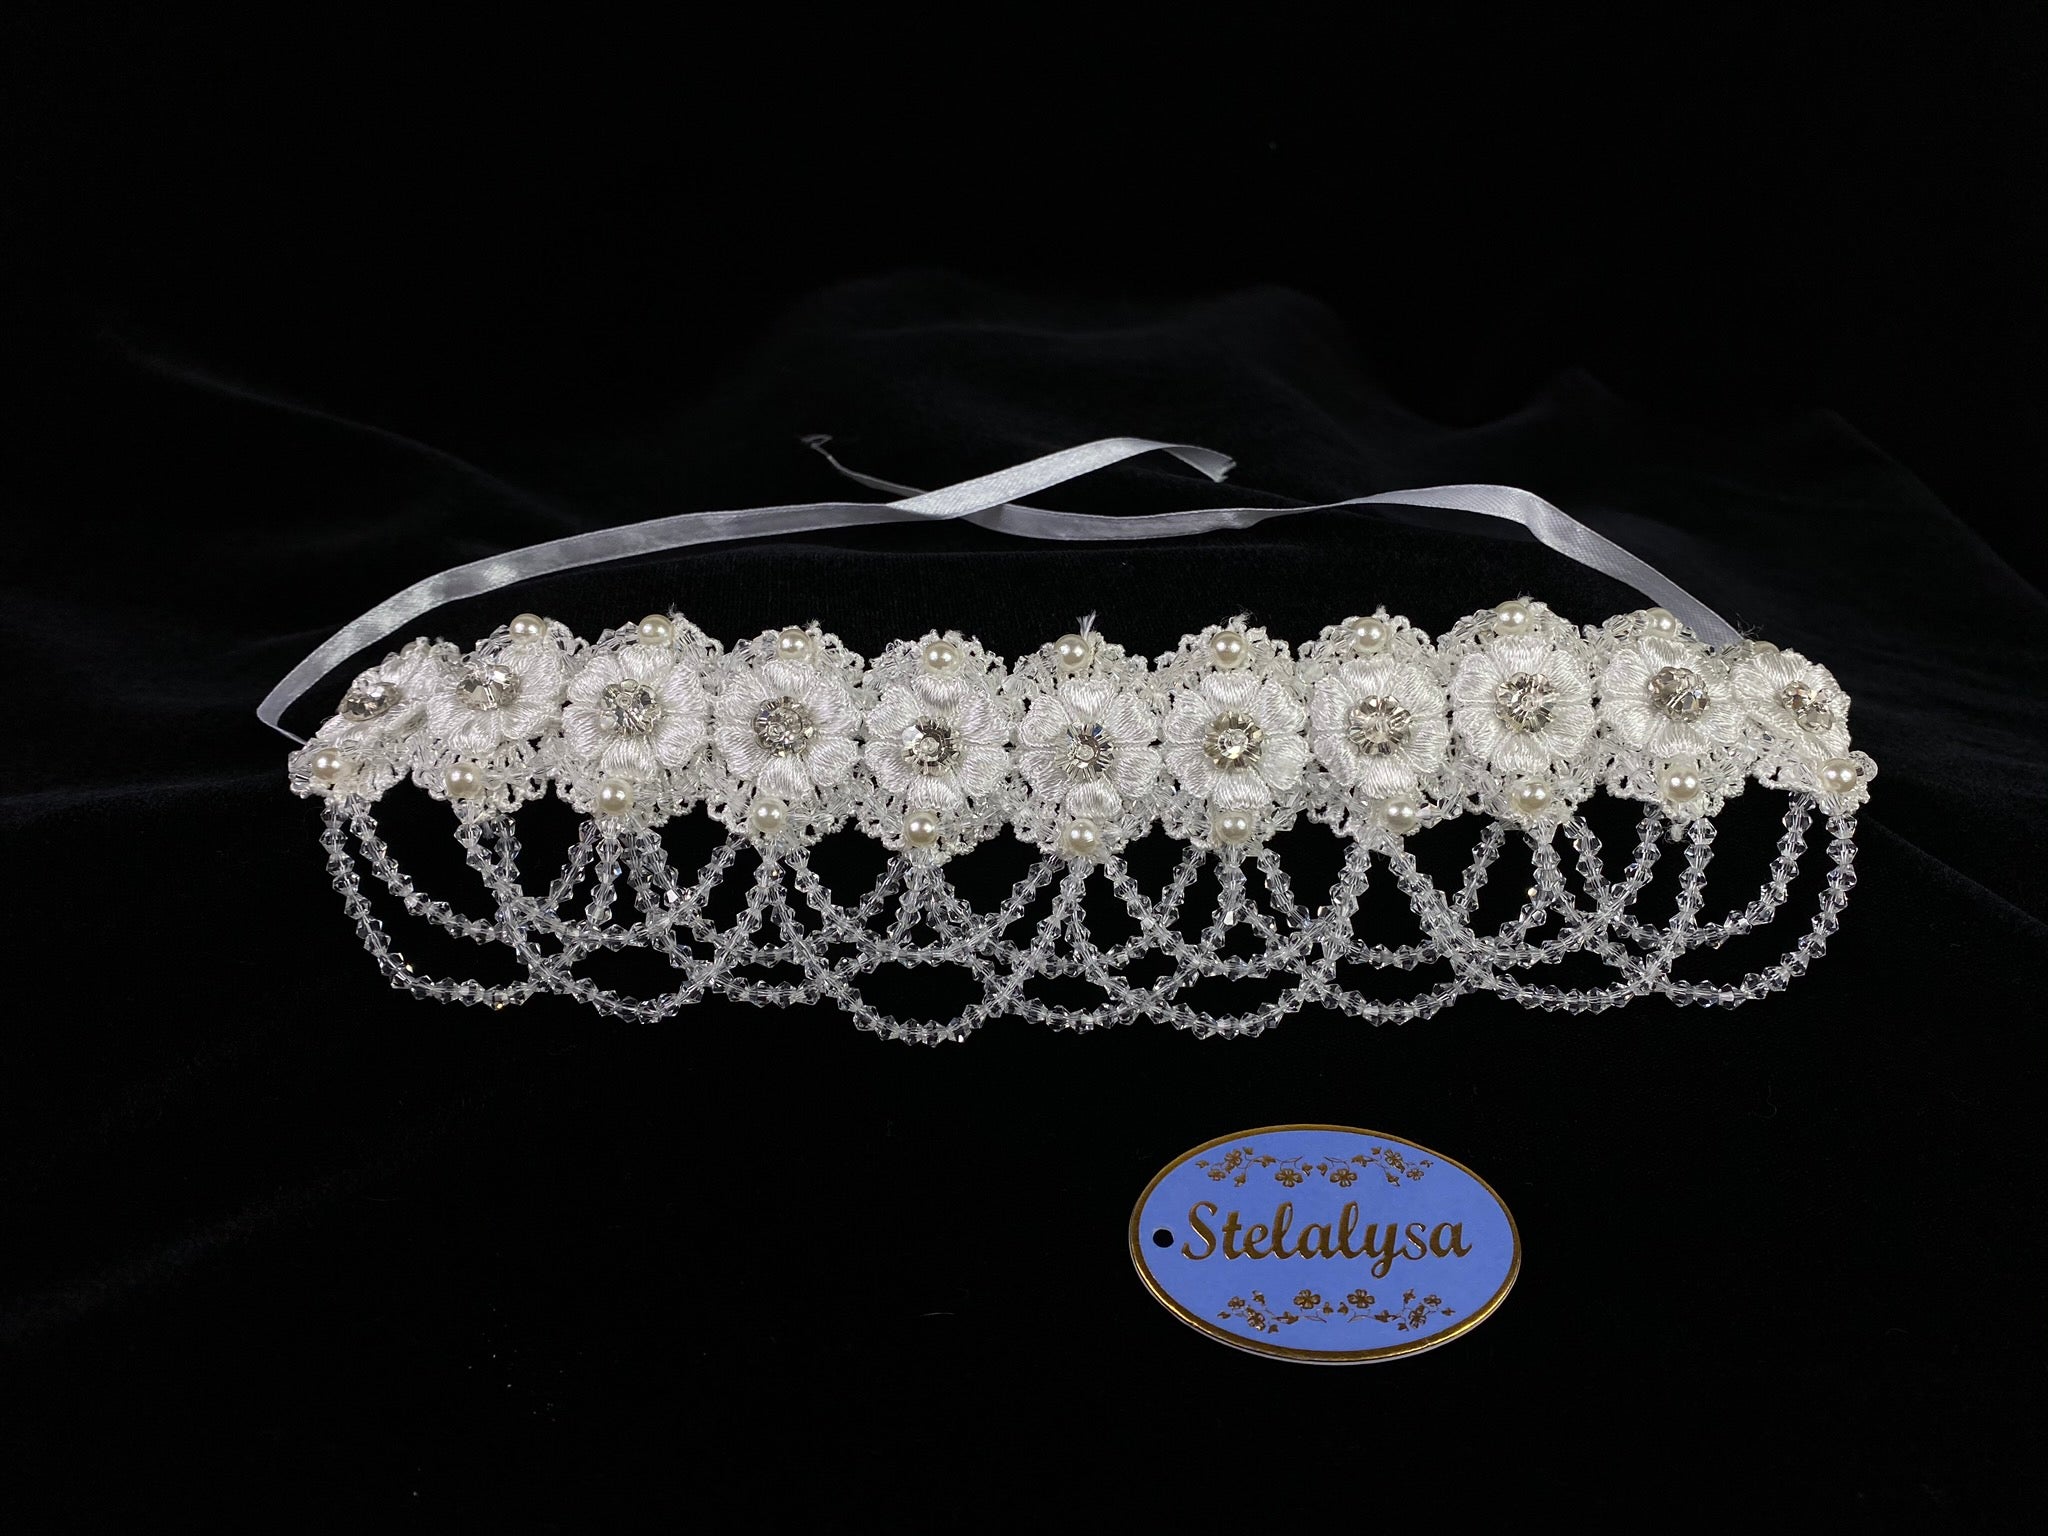 A must have for the First Communion!   Beautiful headband applique with pearl and crystal detailing, along embroidered flower band.  Headband is 12" long, to tie beautifully around the head.   The headband ties with two satin ribbons giving it an elegant look.   This headband can be worn with any of the First Communion dresses. 